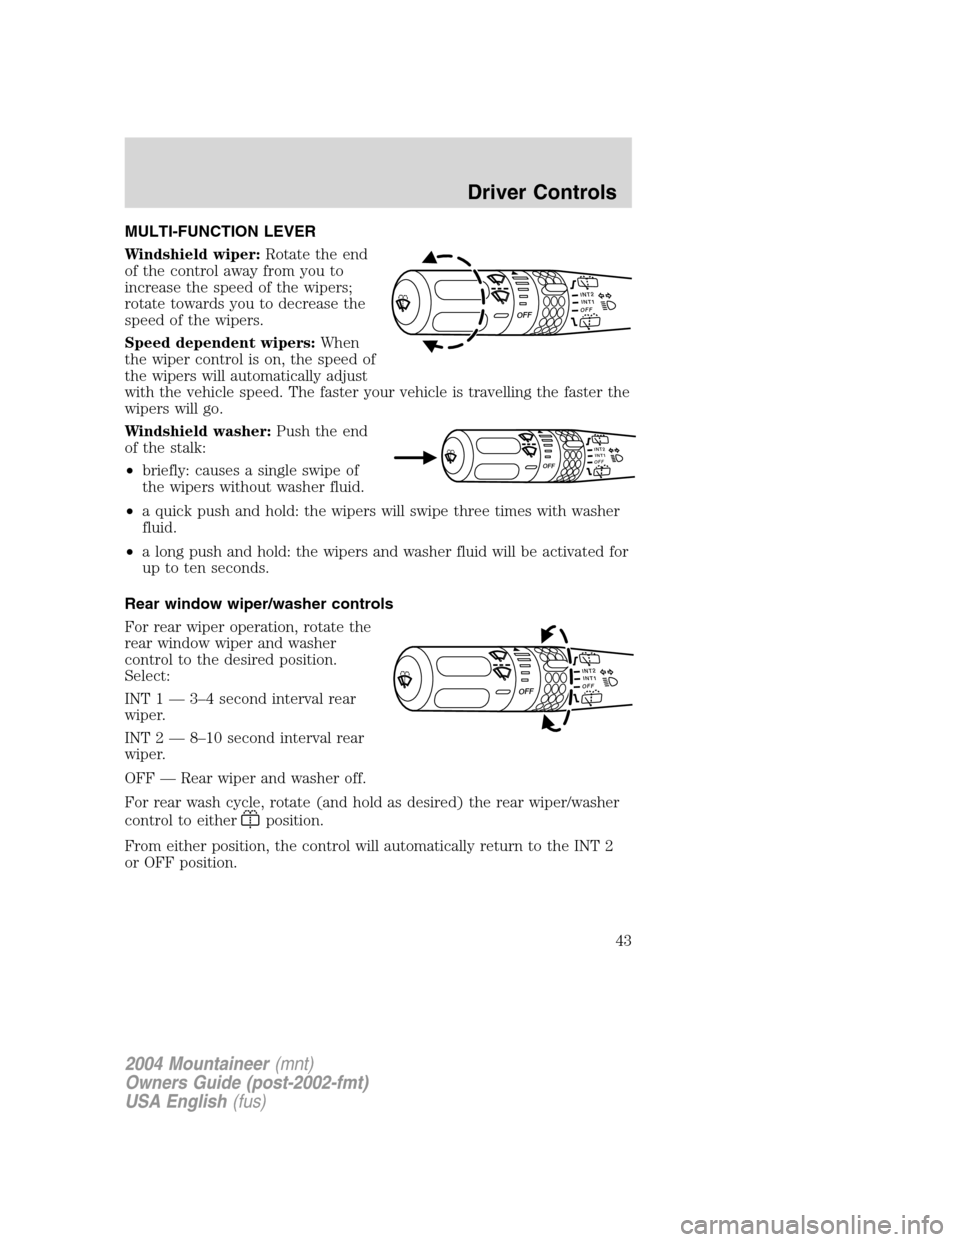 Mercury Mountaineer 2004  s Service Manual MULTI-FUNCTION LEVER
Windshield wiper:Rotate the end
of the control away from you to
increase the speed of the wipers;
rotate towards you to decrease the
speed of the wipers.
Speed dependent wipers:Wh